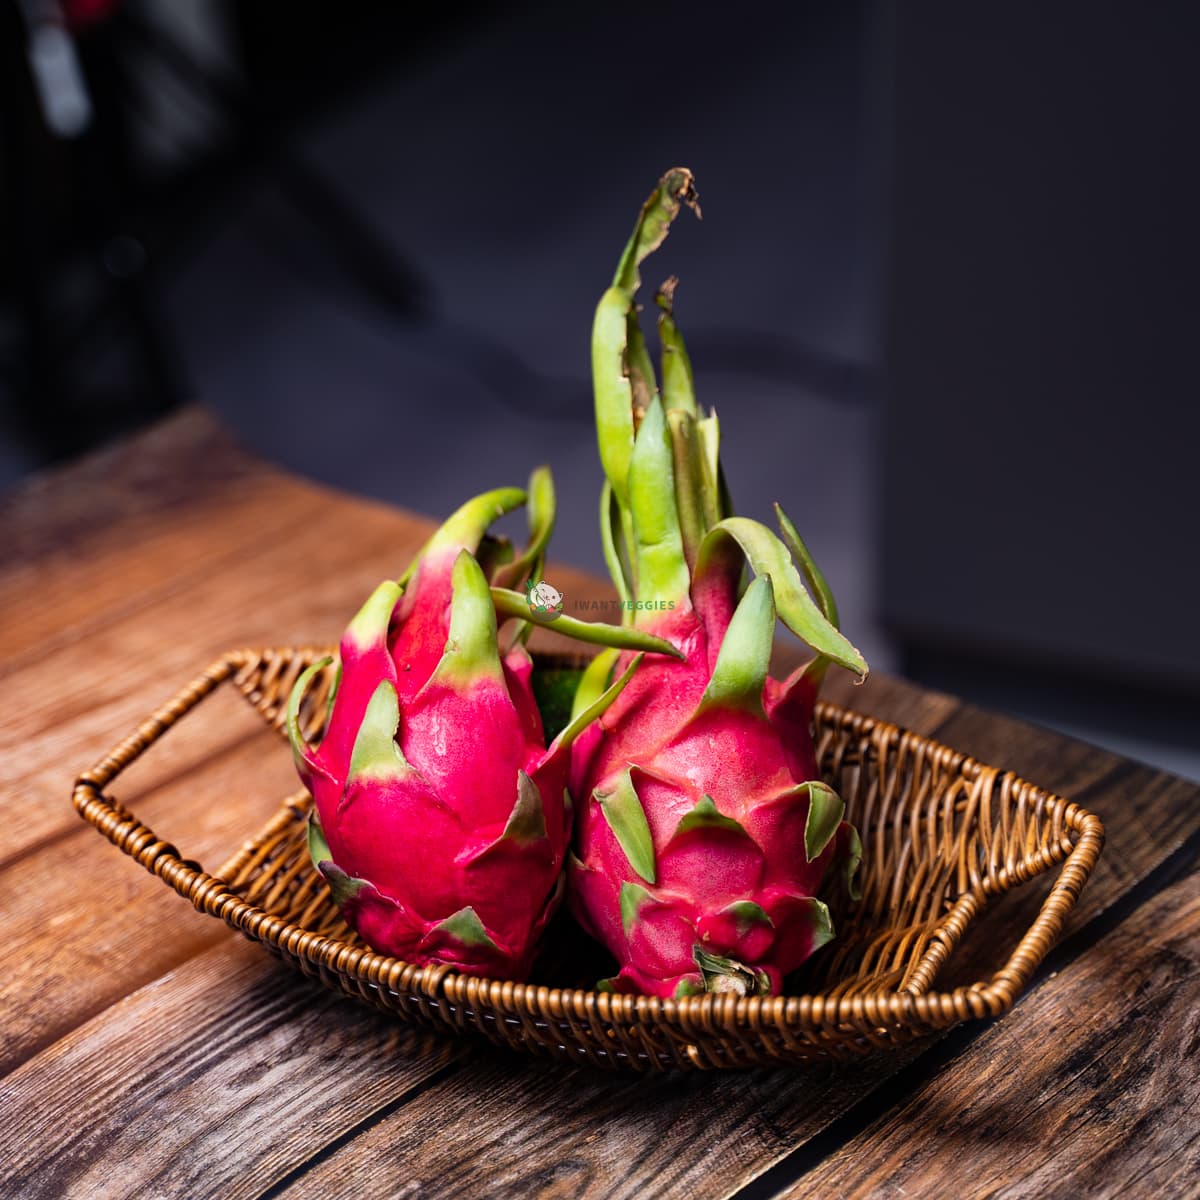 Two red dragon fruits on a basket and wooden surface. Colorful, ripe, and ready-to-eat tropical fruits.